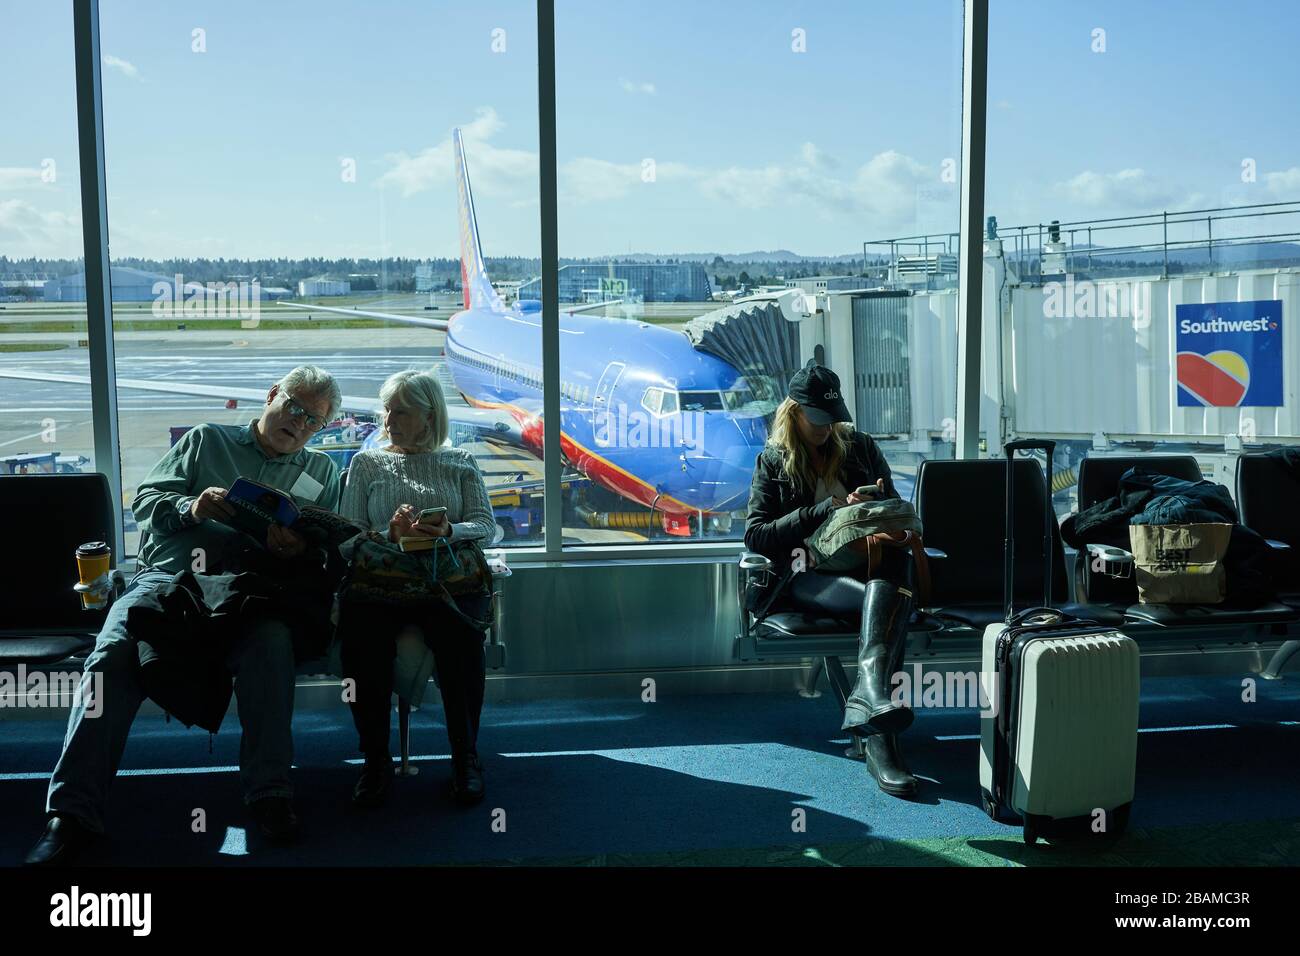 Passengers waiting to board a Southwest Airlines flight at the gate in the terminal building in Portland International Airport on Sunday, Feb 23, 2020. Stock Photo